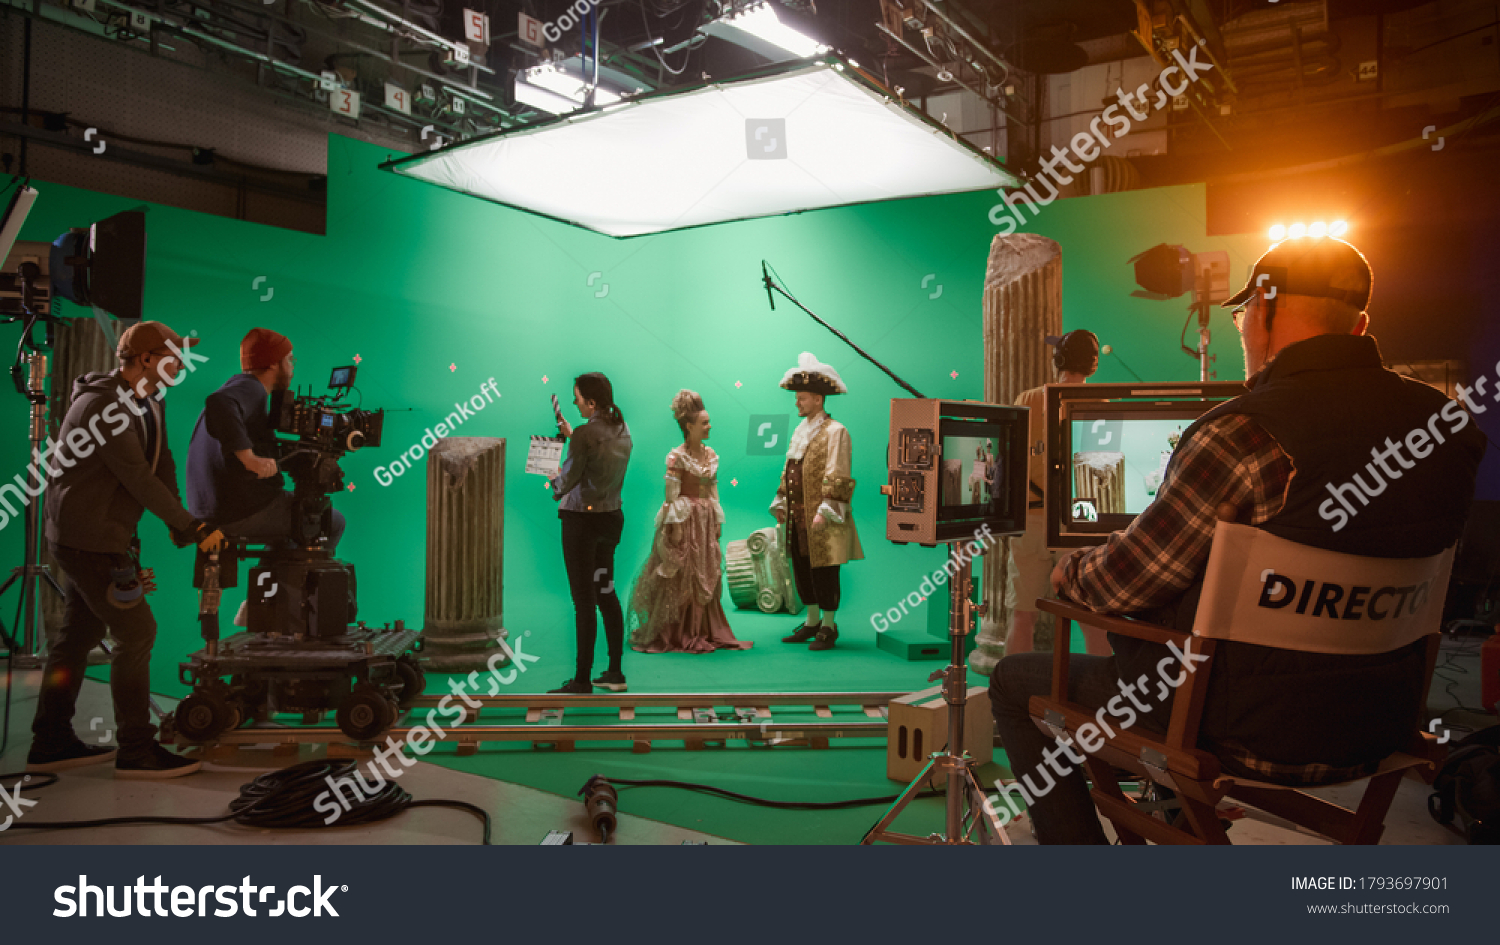 On Big Film Studio Professional Crew Shooting History Costume Drama Movie. On Set: Director Controls Cameraman Shooting Green Screen Scene with Two Actors Talented Wearing Renaissance Clothes Talking #1793697901